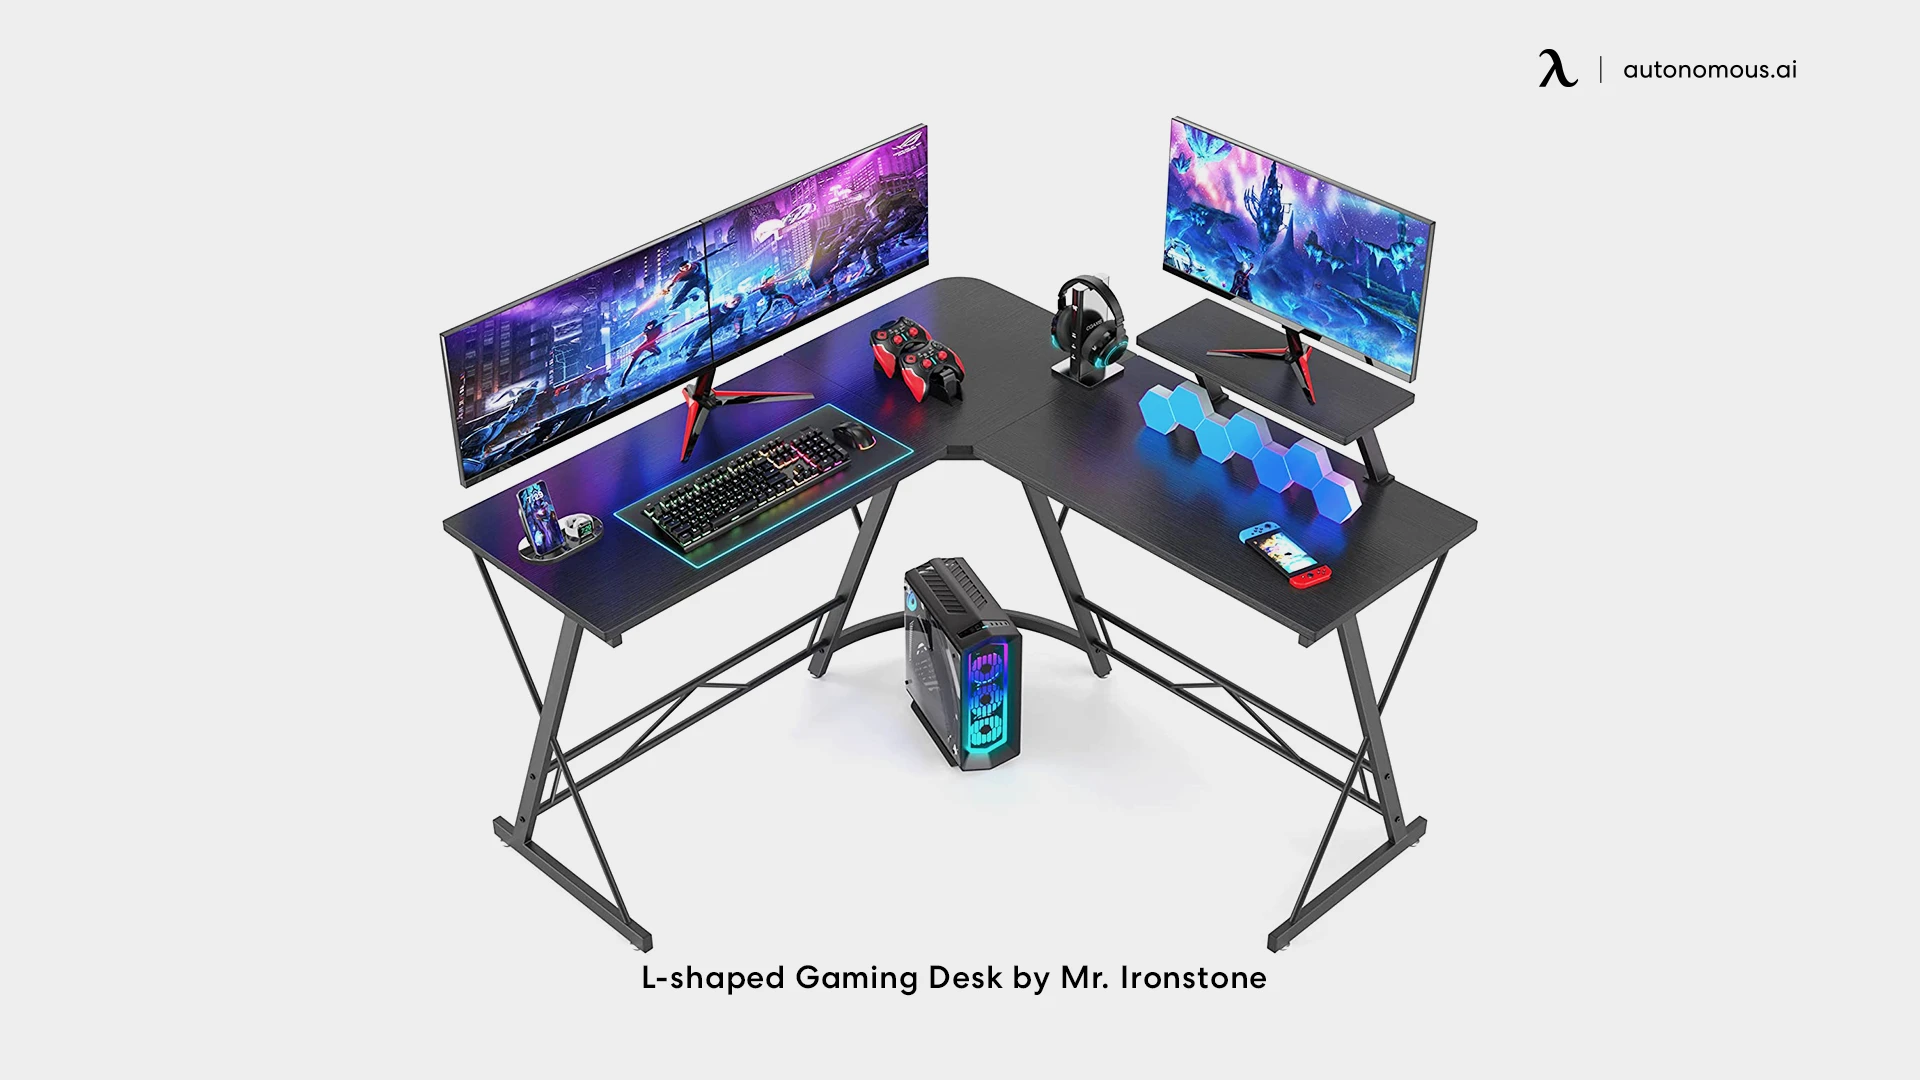 L-shaped Gaming Desk by Mr. Ironstone